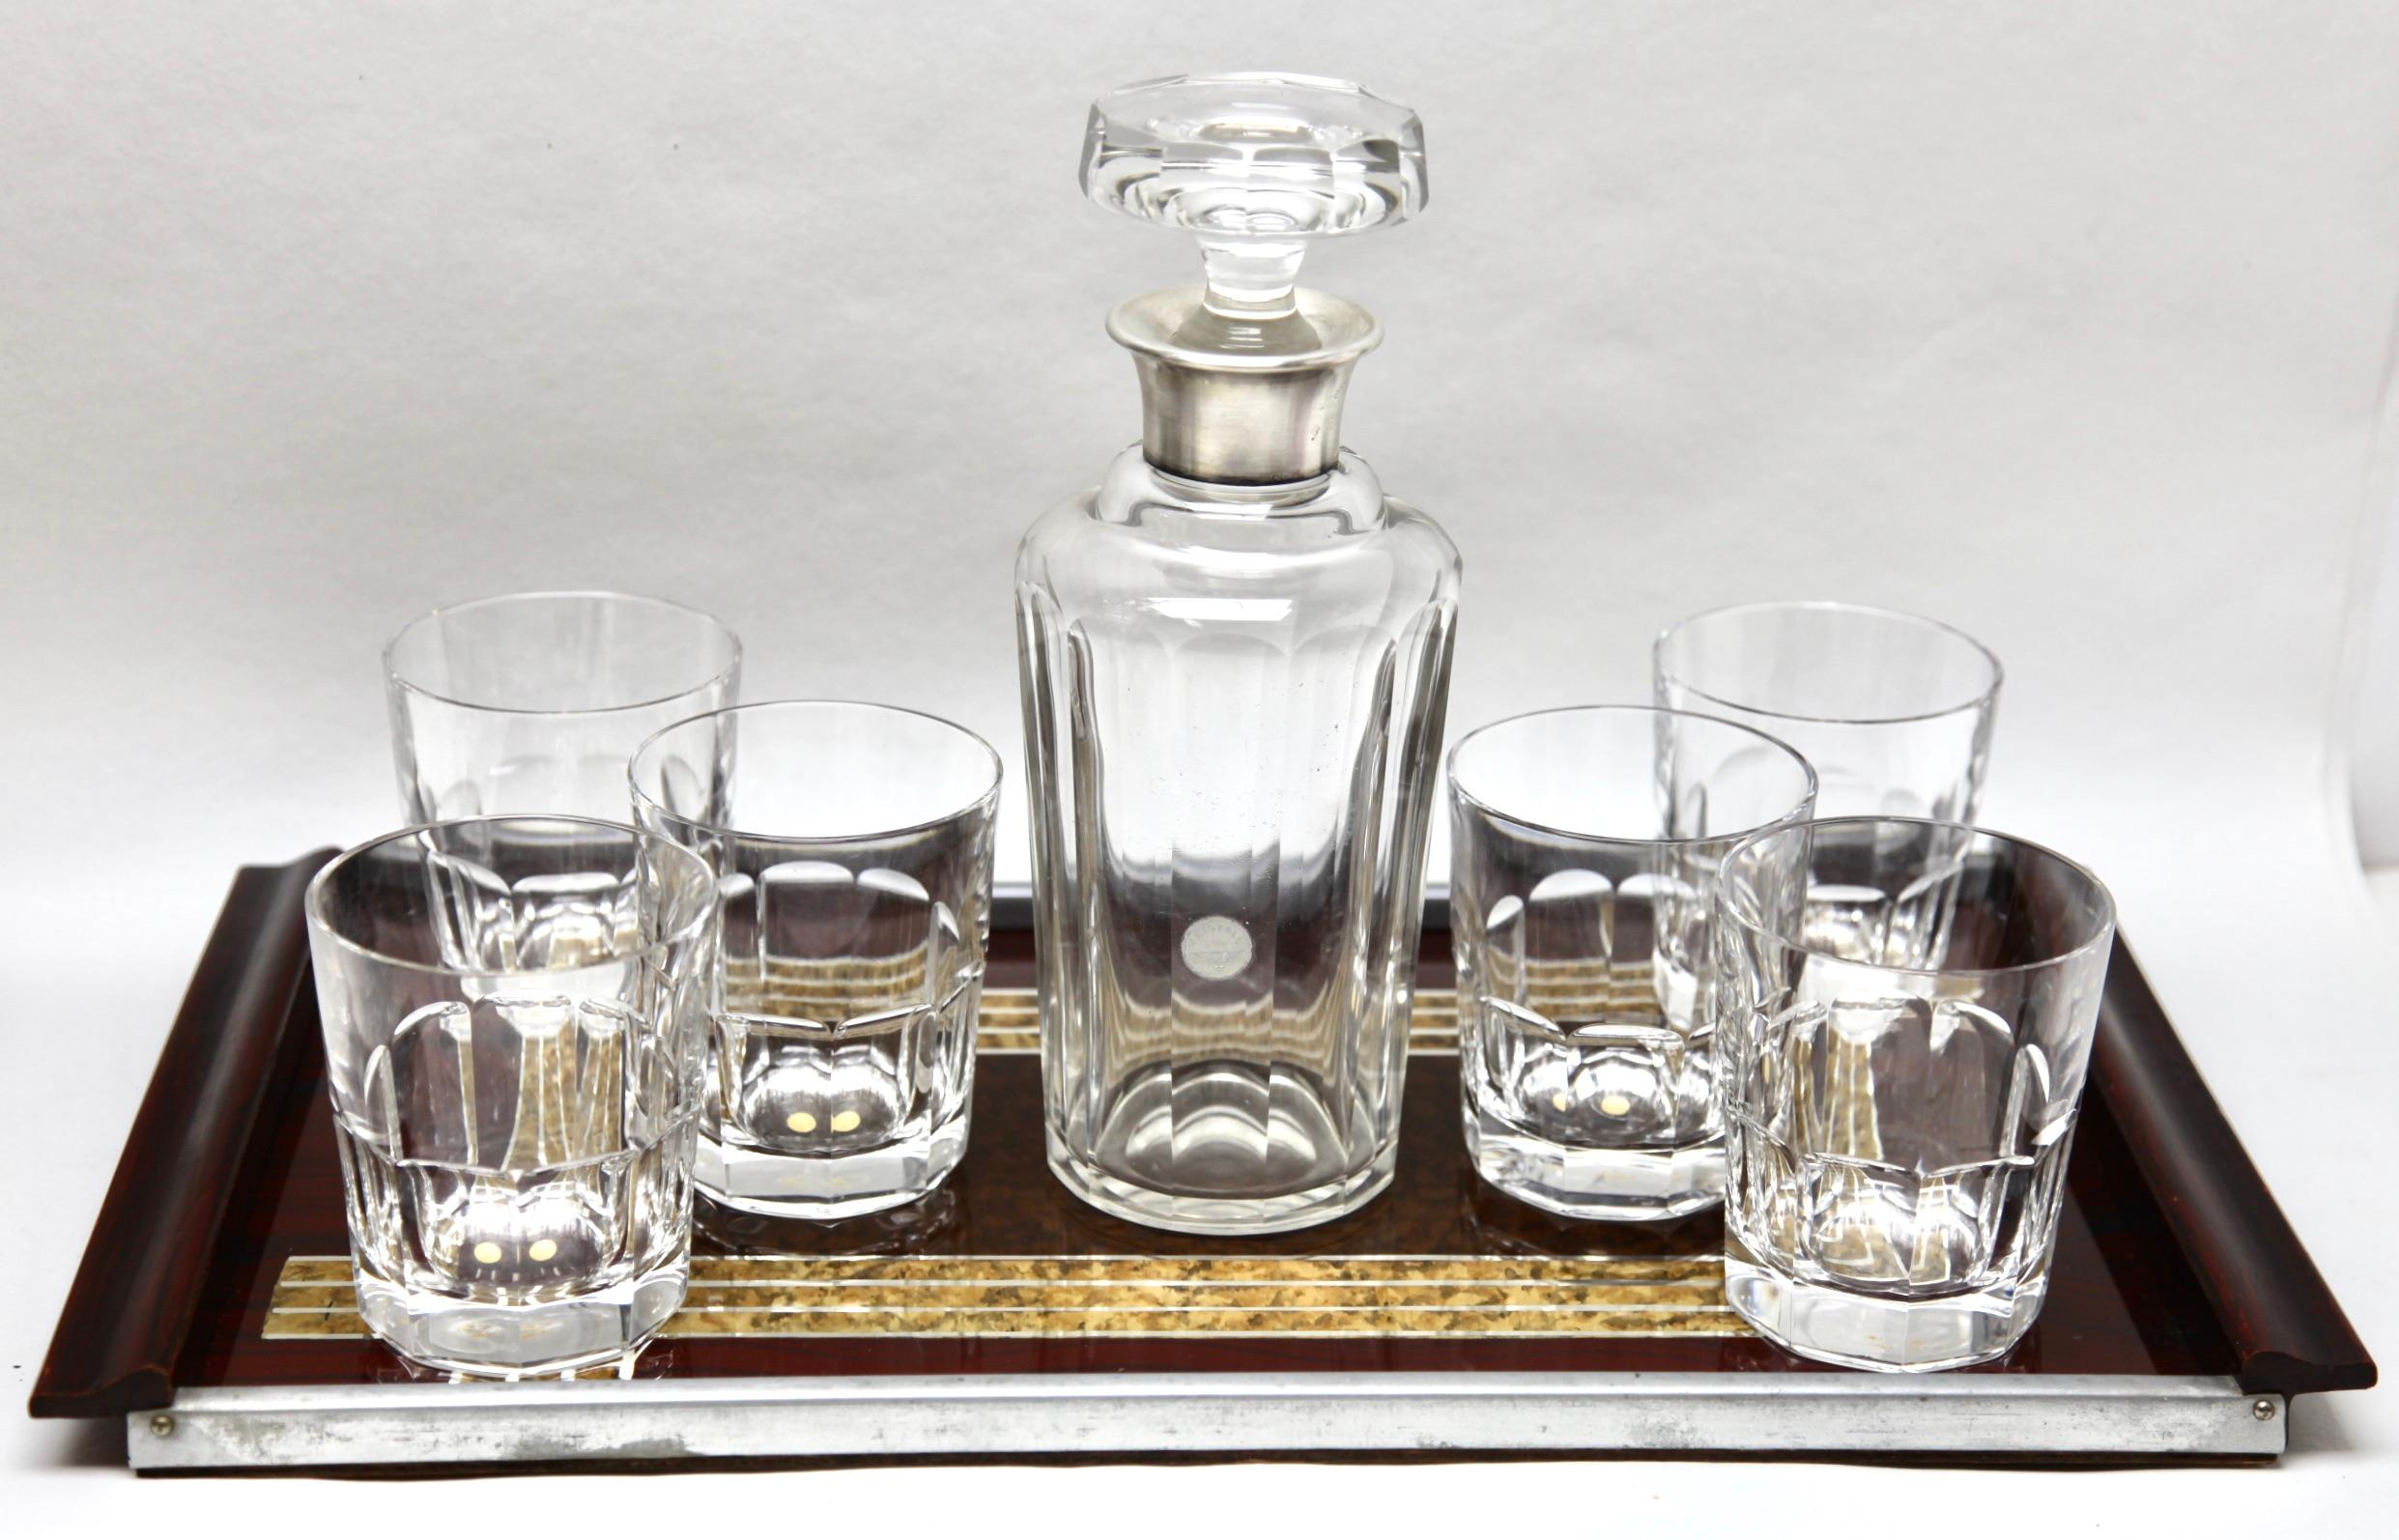 Whisky Set by Val Saint Lambert Decanter + 6 glasses Belgium, with Serving Tray
Glass Factory Val Saint Lambert, Belgium.

Set with a decanter and 6 matching Whisky glasses and a serving tray.
whisky glasses have never been used still in original